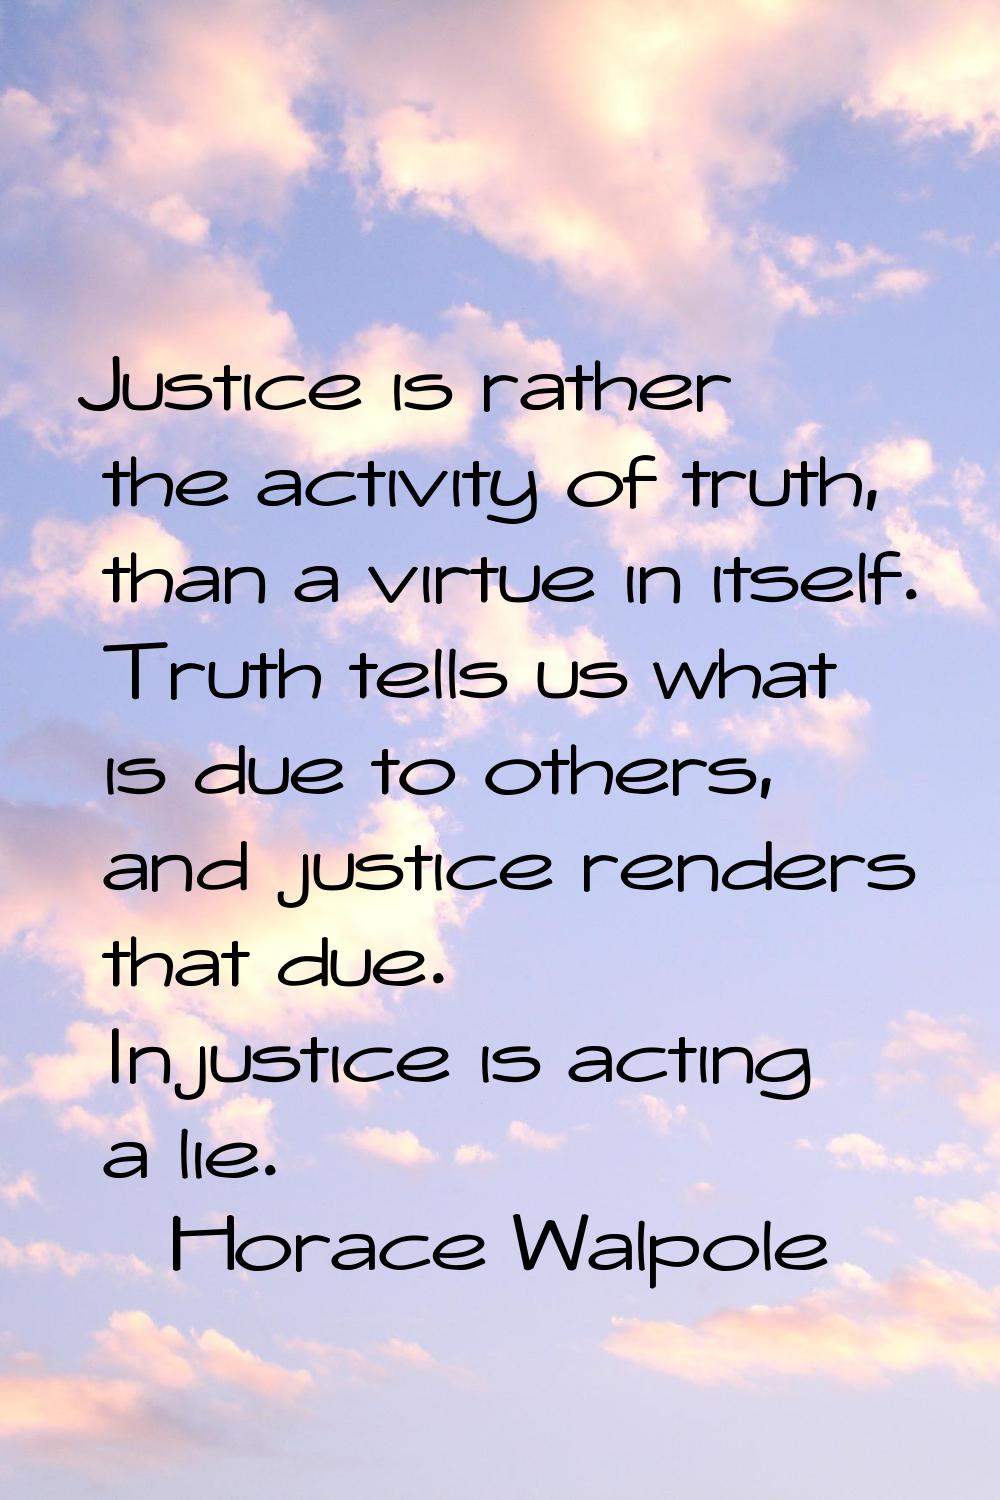 Justice is rather the activity of truth, than a virtue in itself. Truth tells us what is due to oth